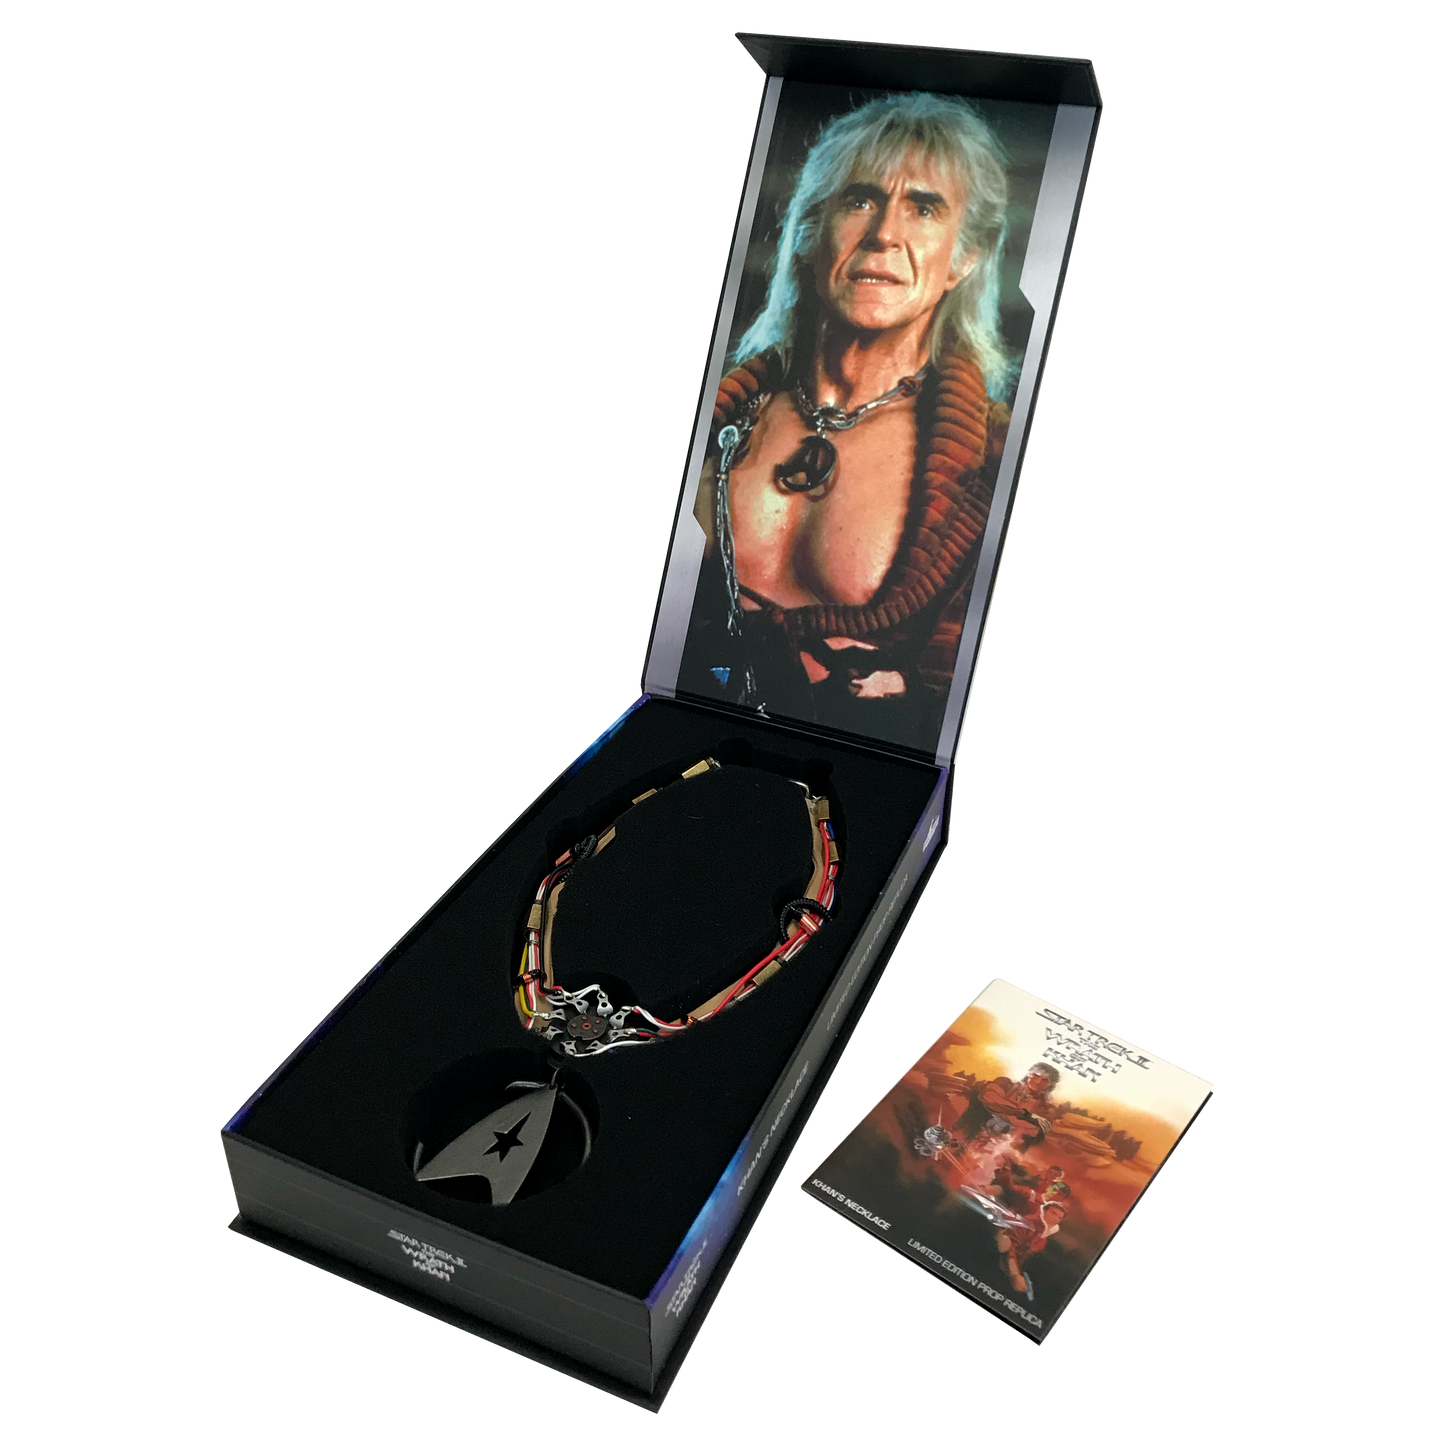 Star Trek II: The Wrath Of Khan - Khan's Necklace Limited Edition Prop Replica